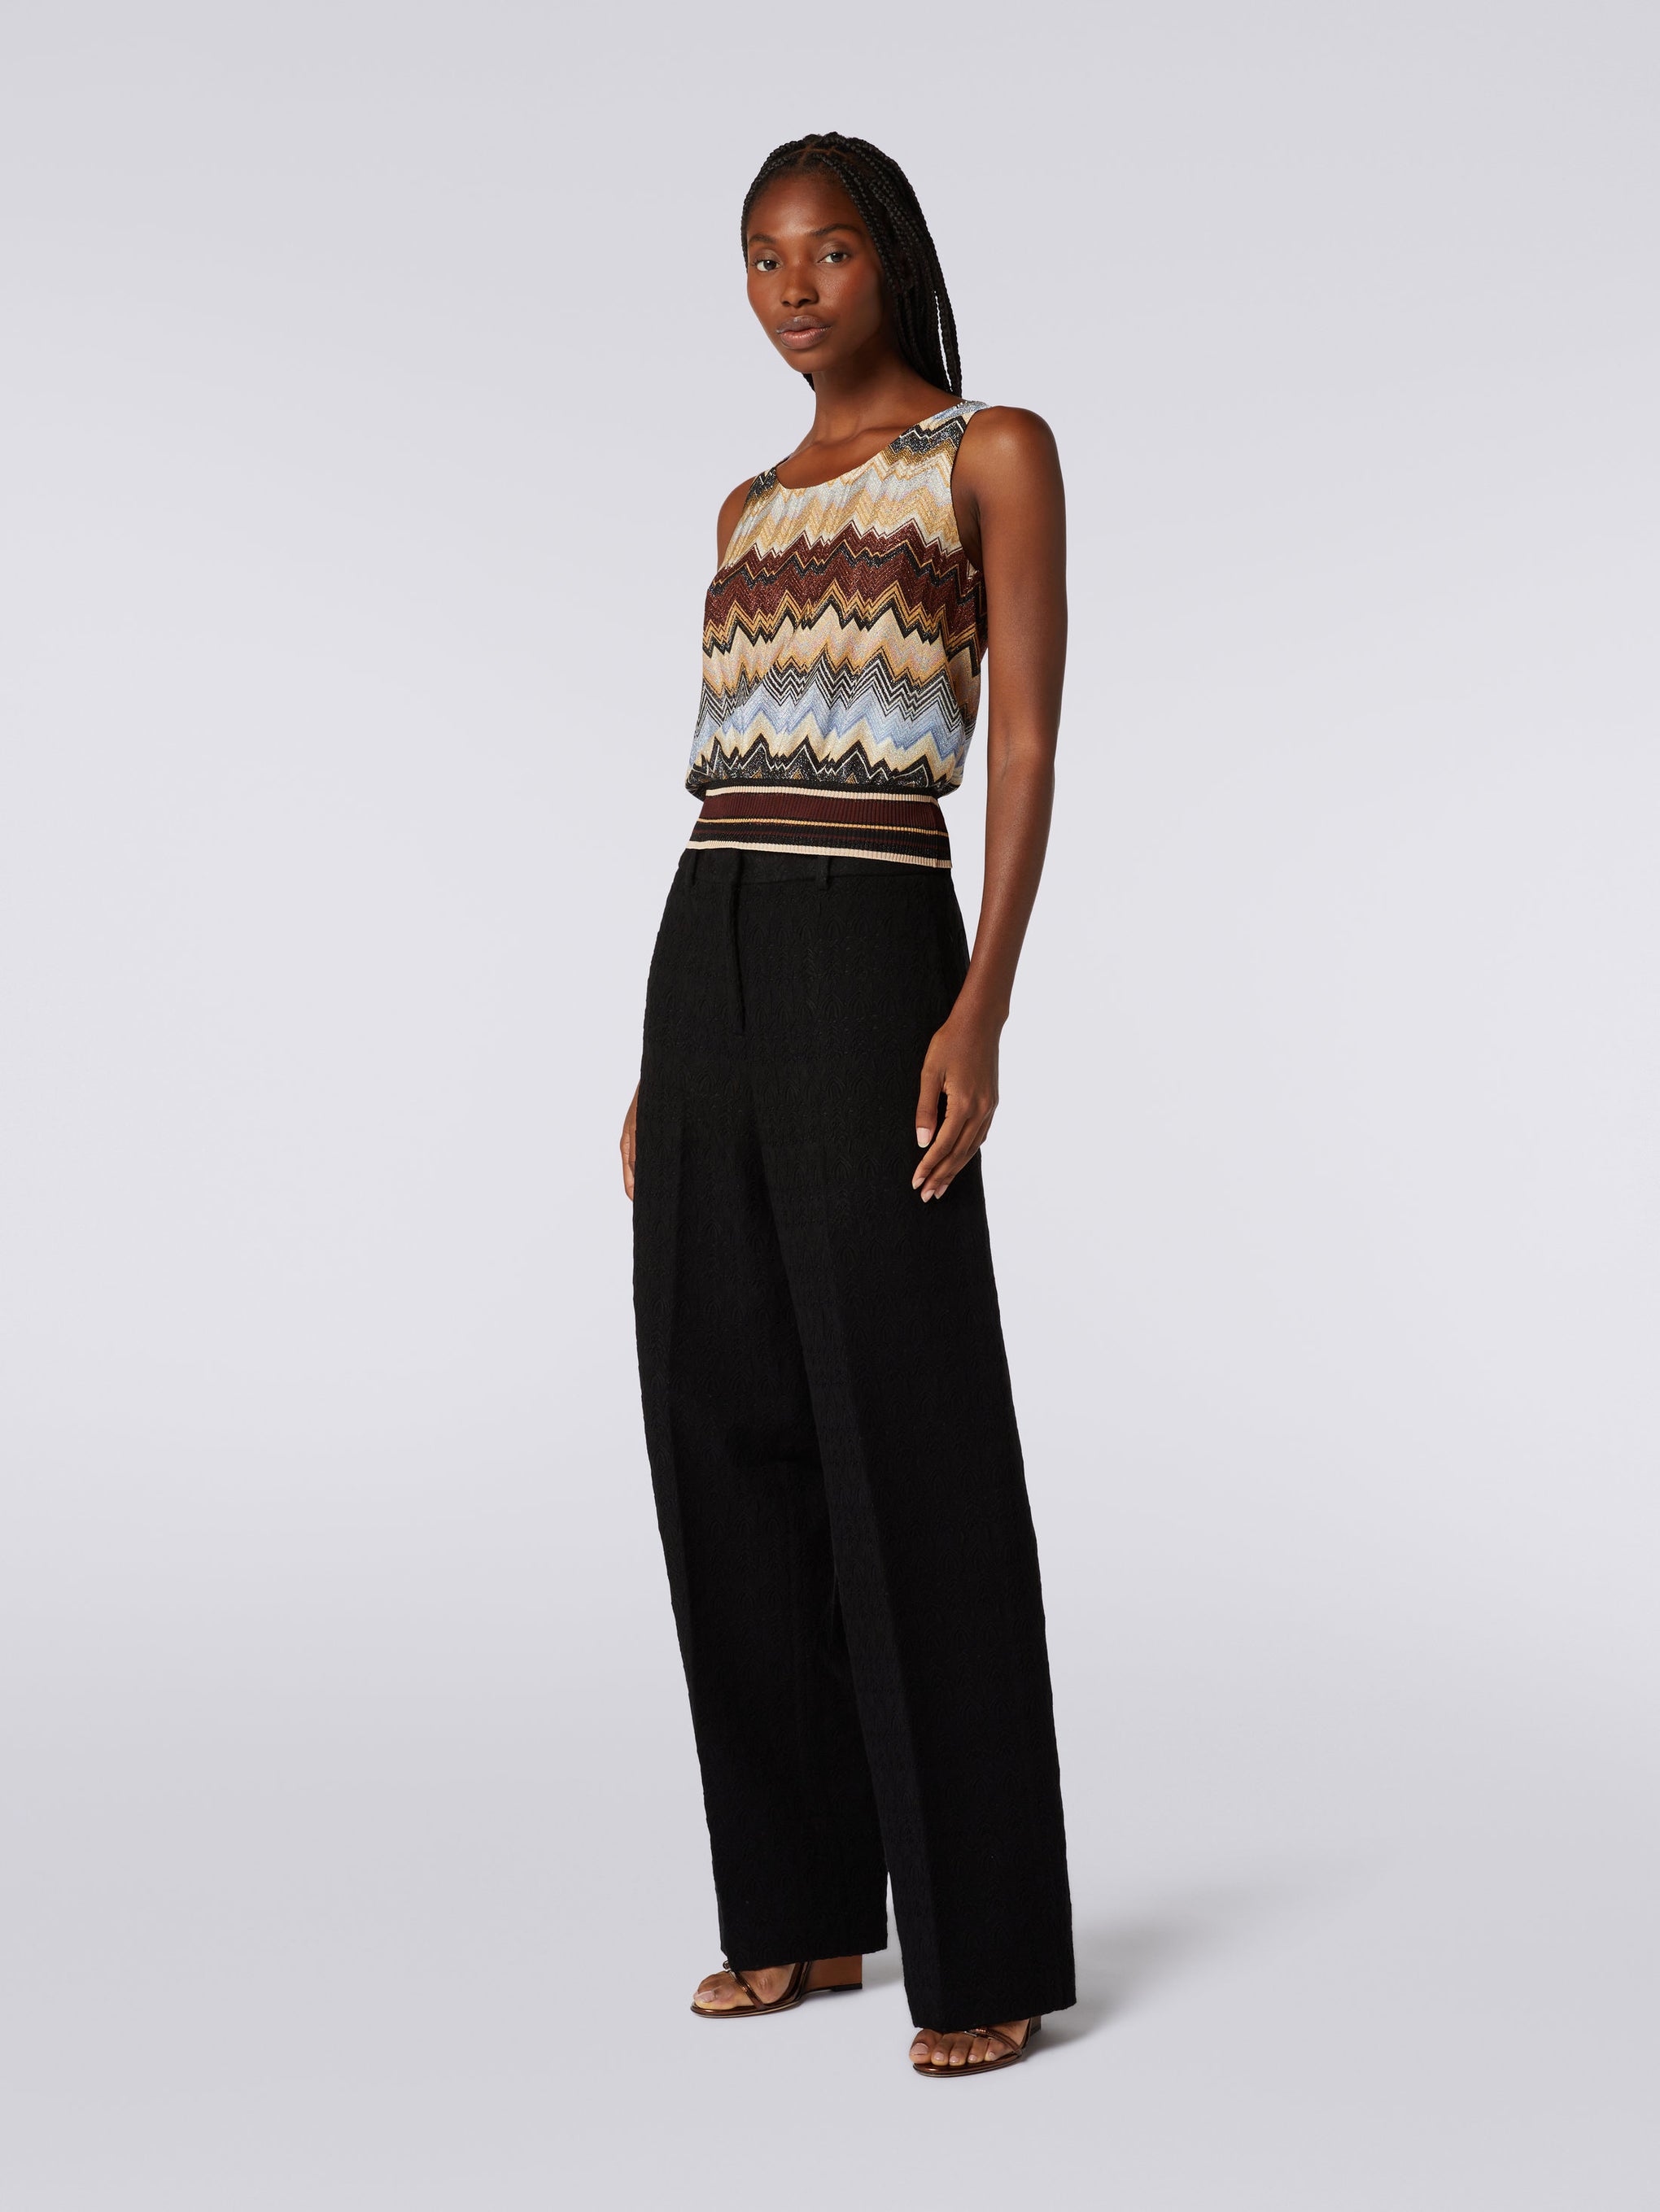 Missoni Top in Irregular Brown Multicolour available at The New Trend Australia.